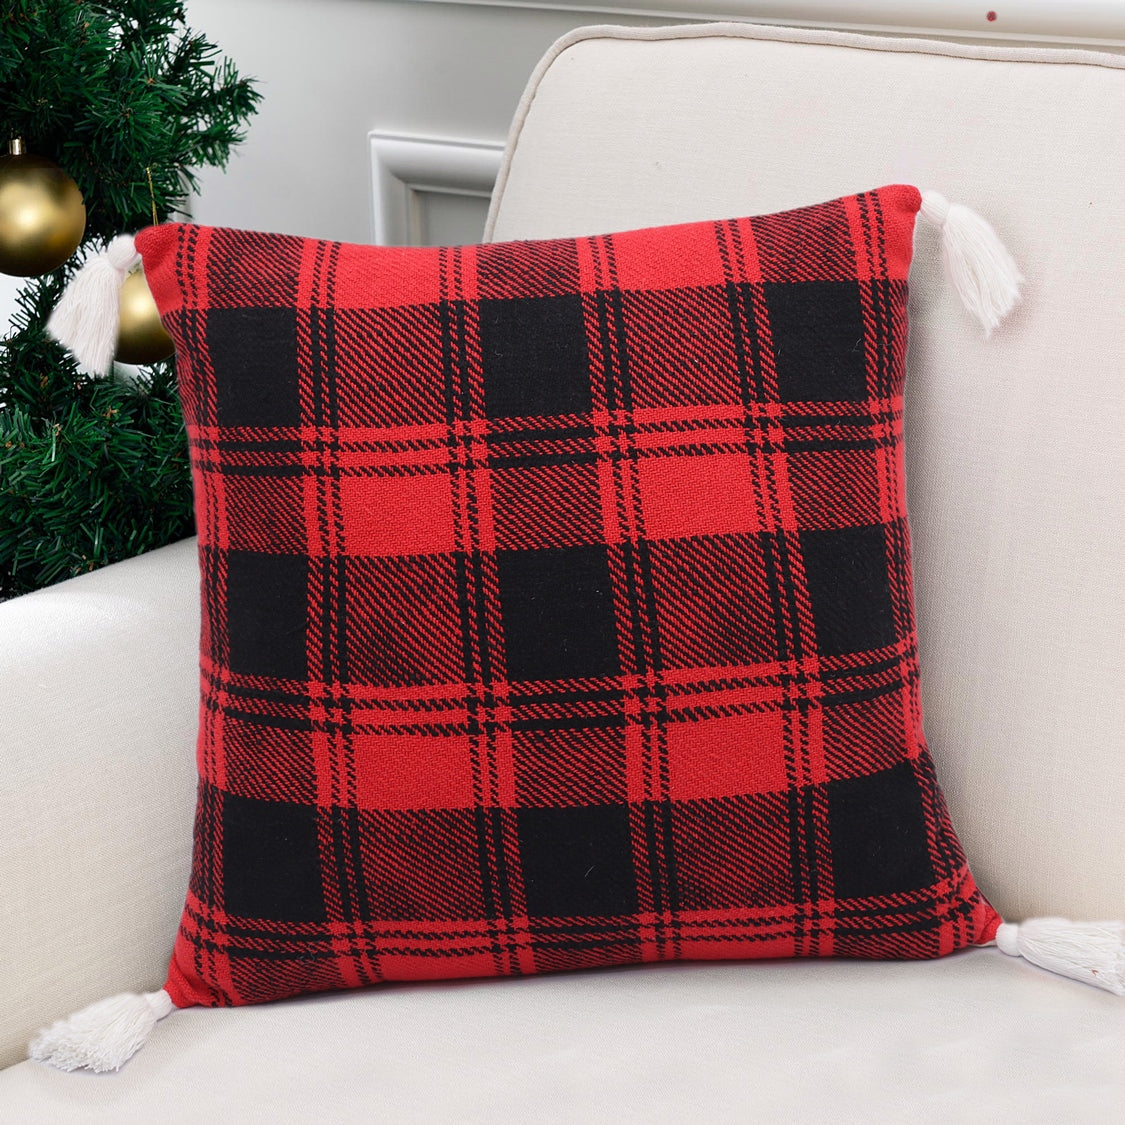 Red and Black Checkered Cotton Cushion Cover